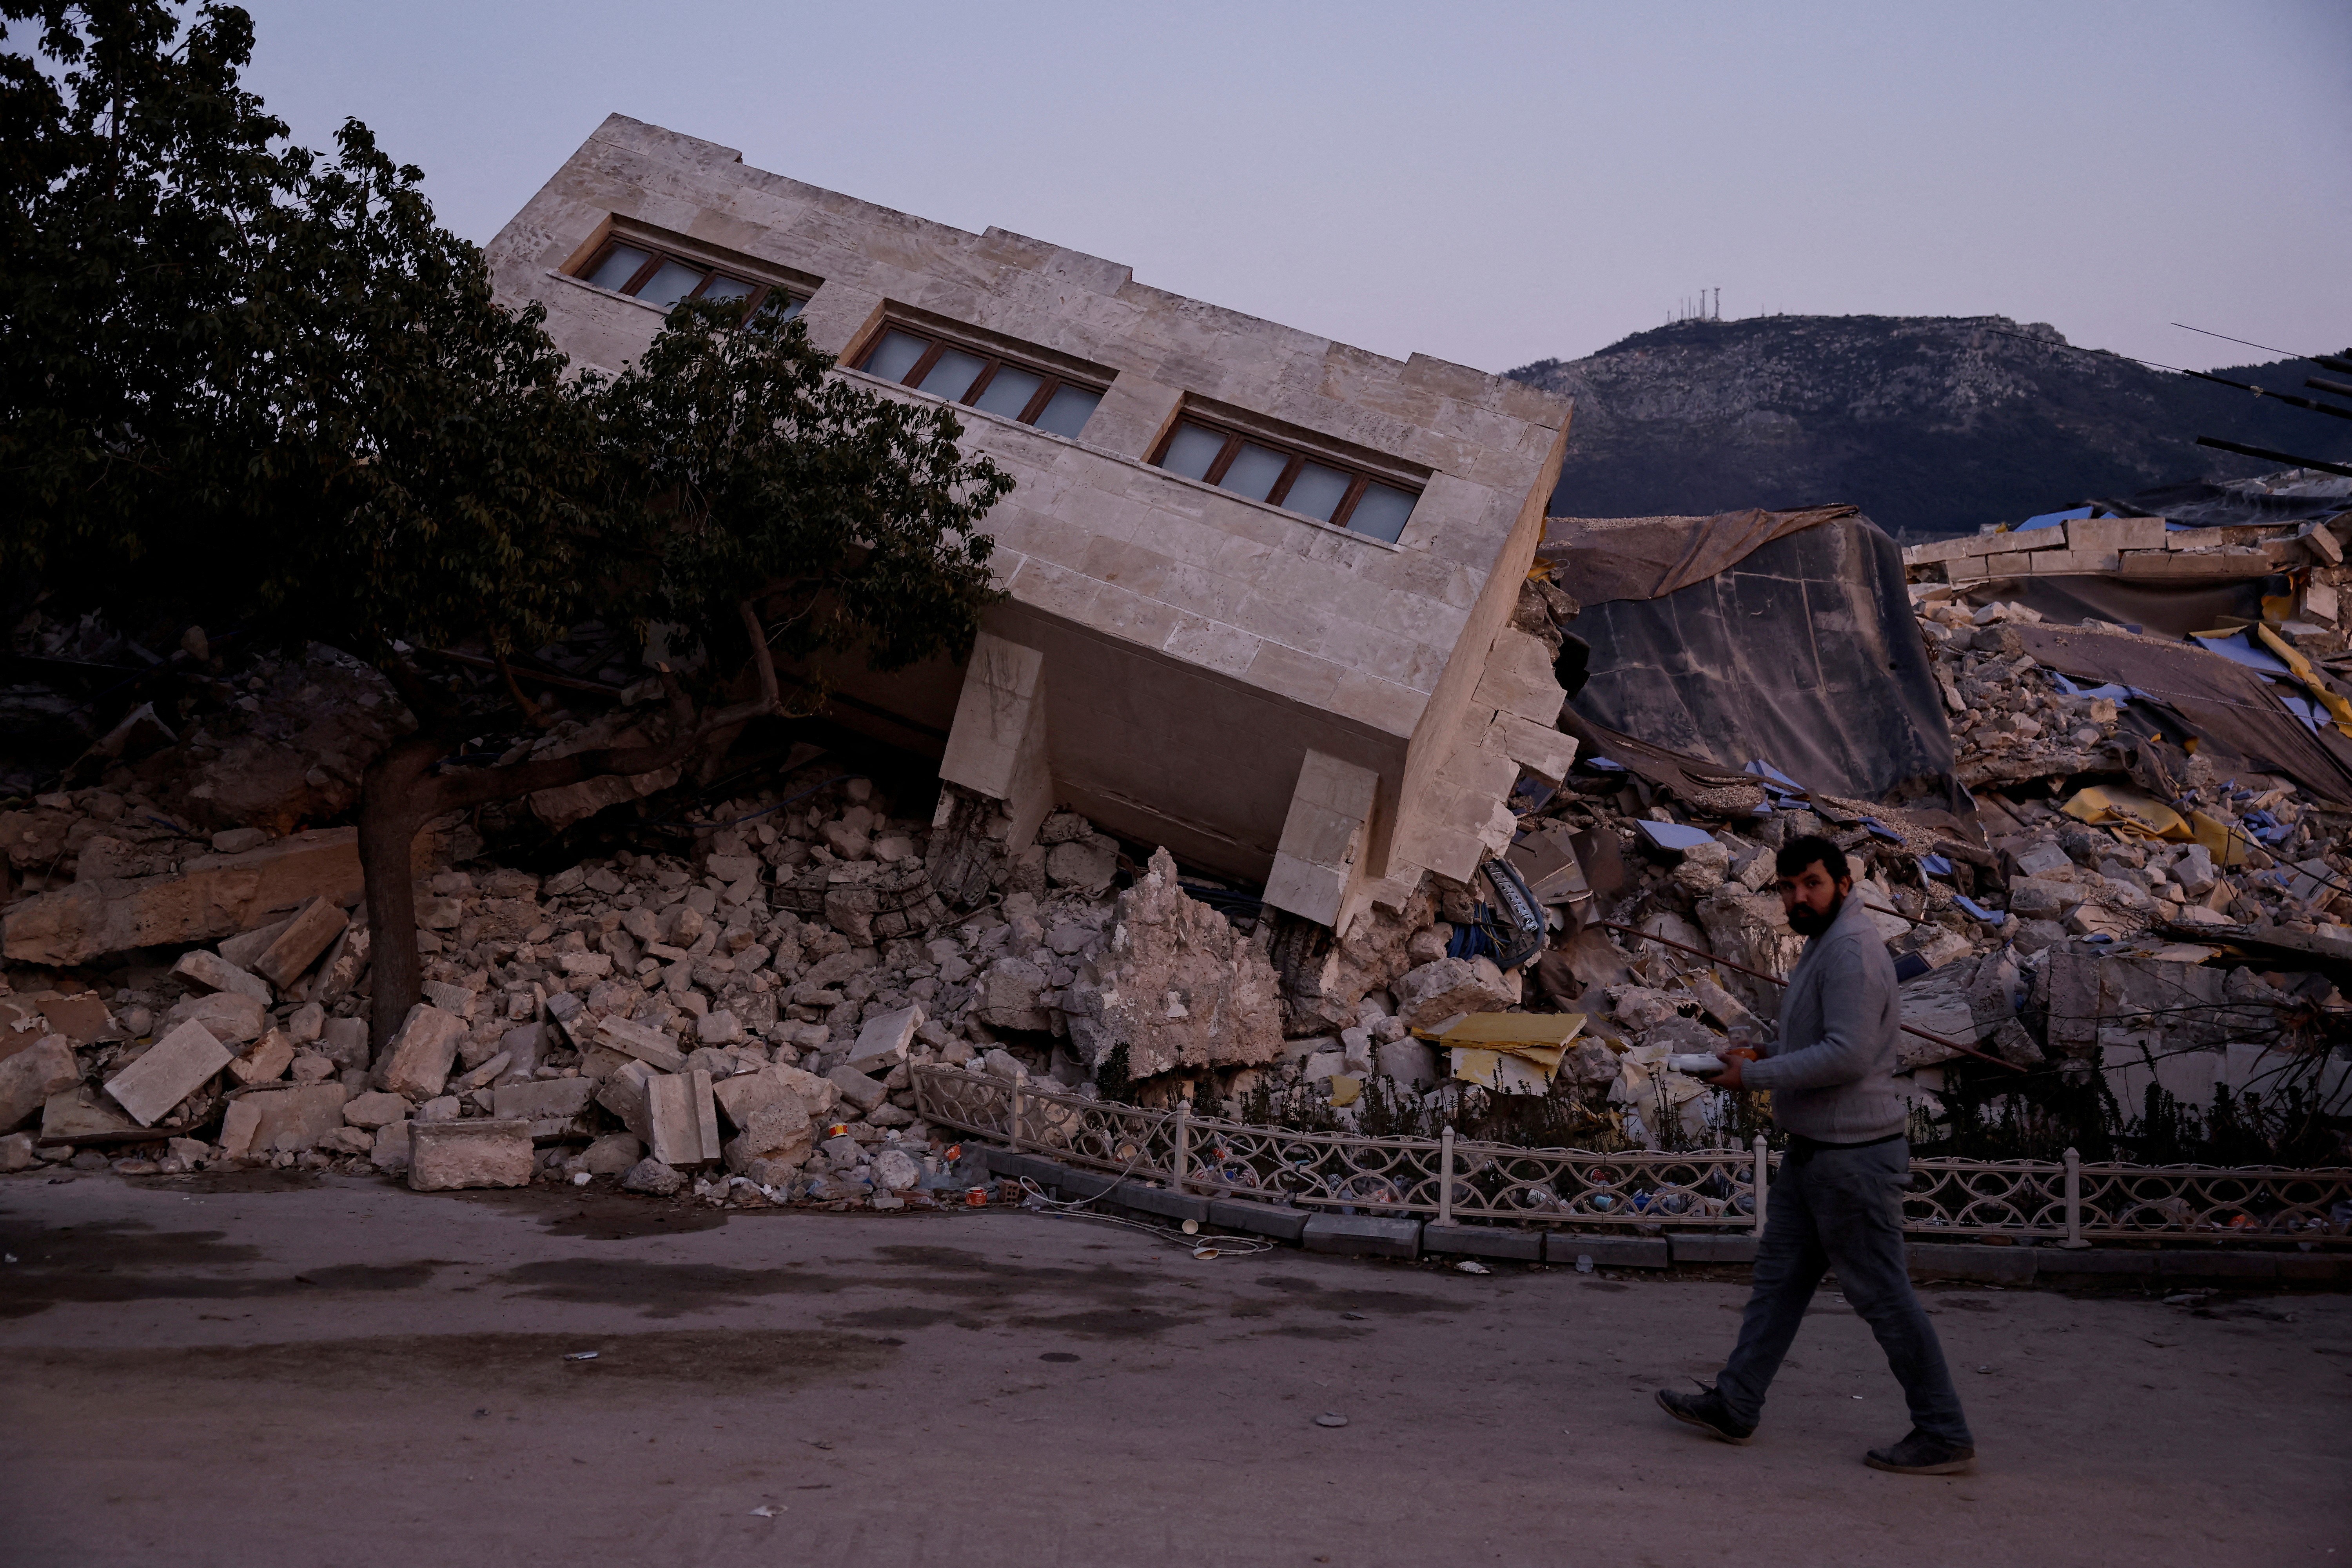 A man walks by a collapsed building and rubble, in the aftermath of a deadly earthquake, in Antakya, Hatay province, Turkey, February 21, 2023. Photo: Reuters